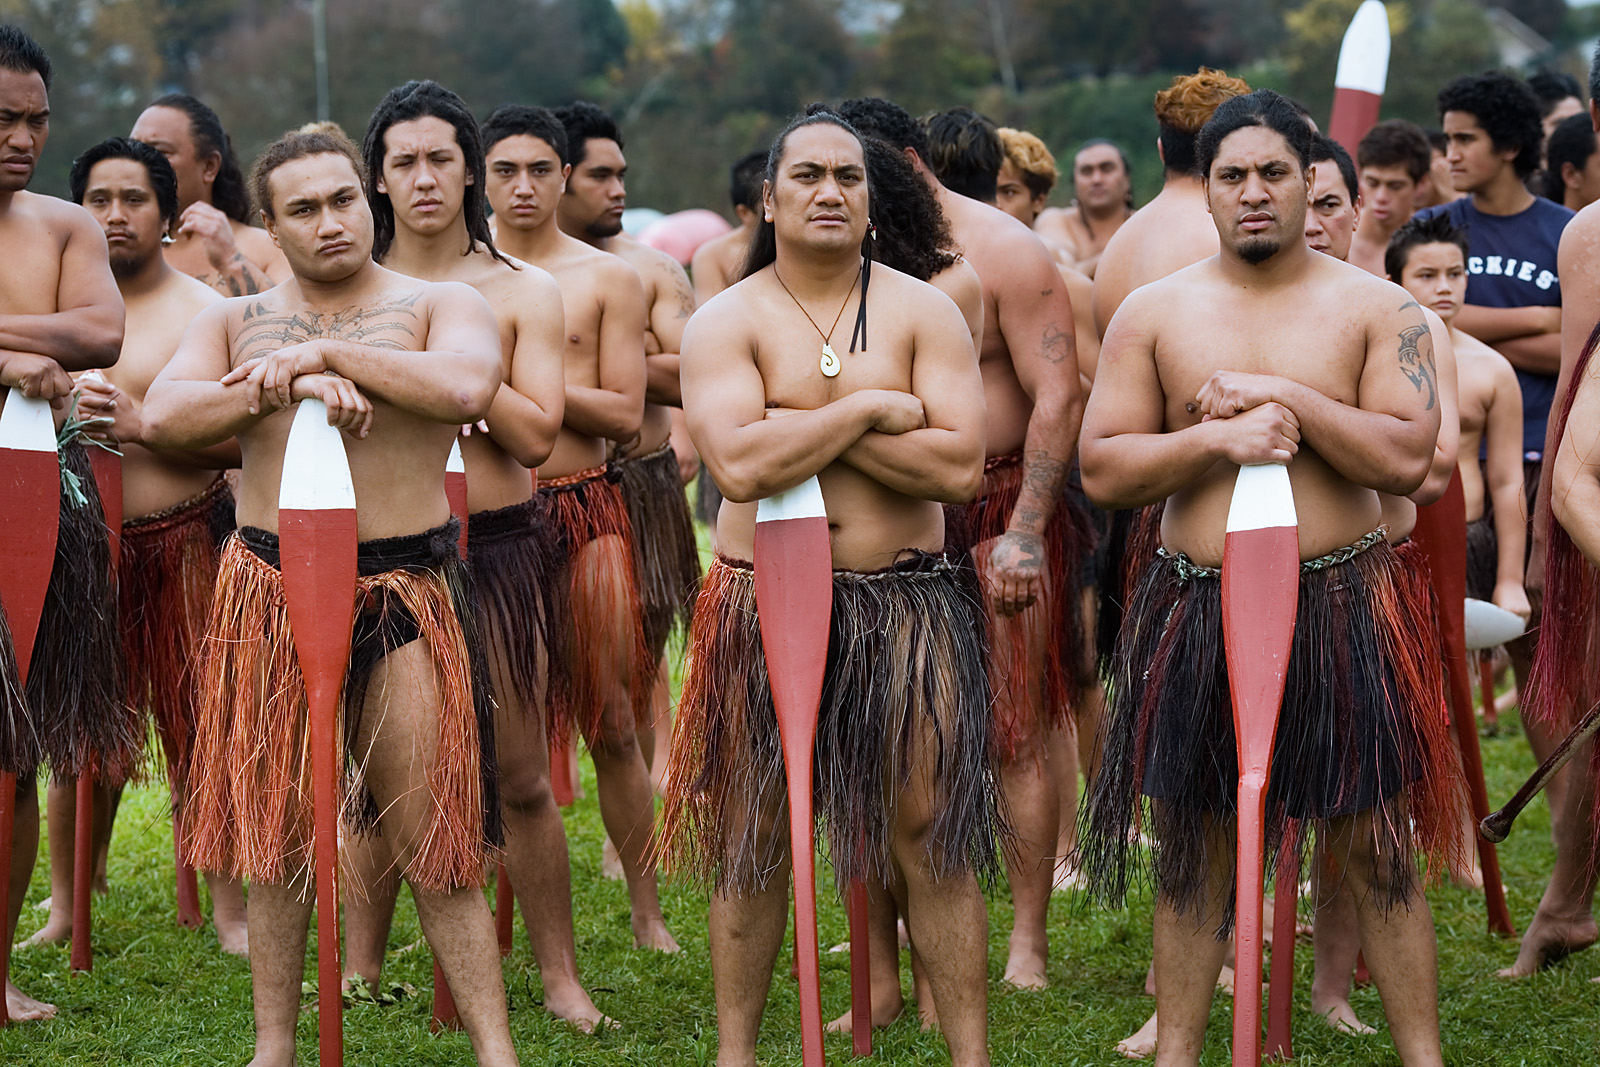 The Maori’s of New Zealand tattoos show a commitment to their tribe and they celebrate major life events.